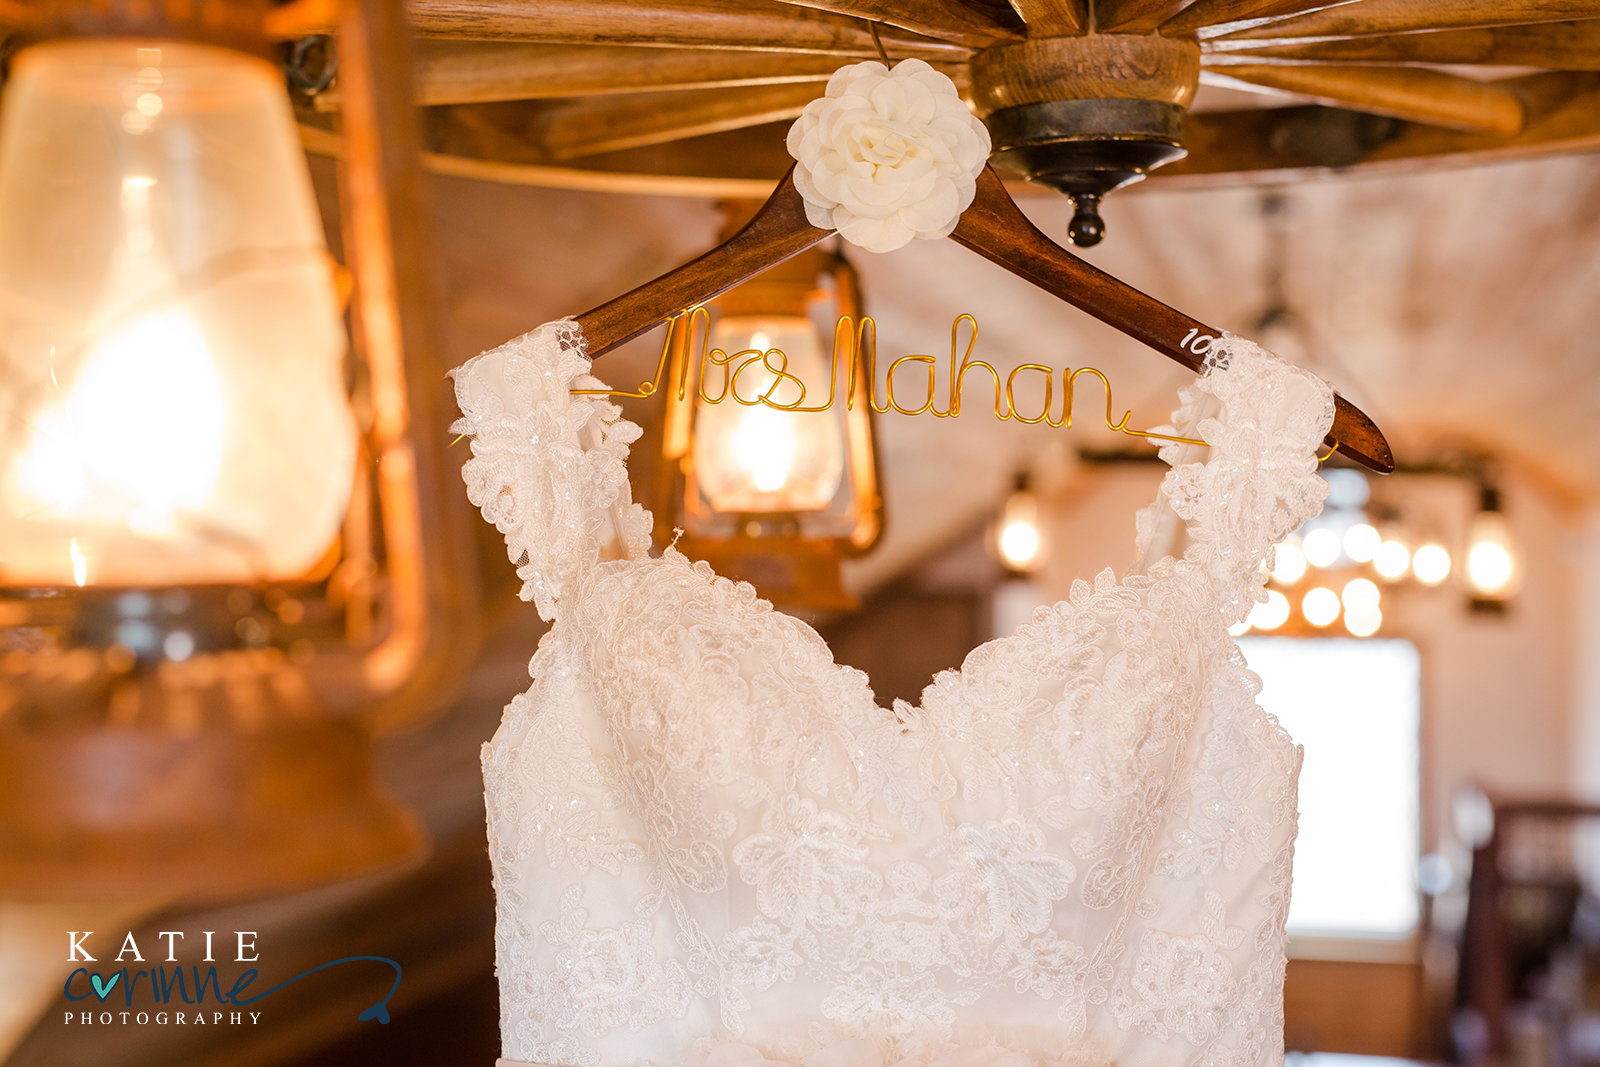 Wedding dress hanging with personalized hanger